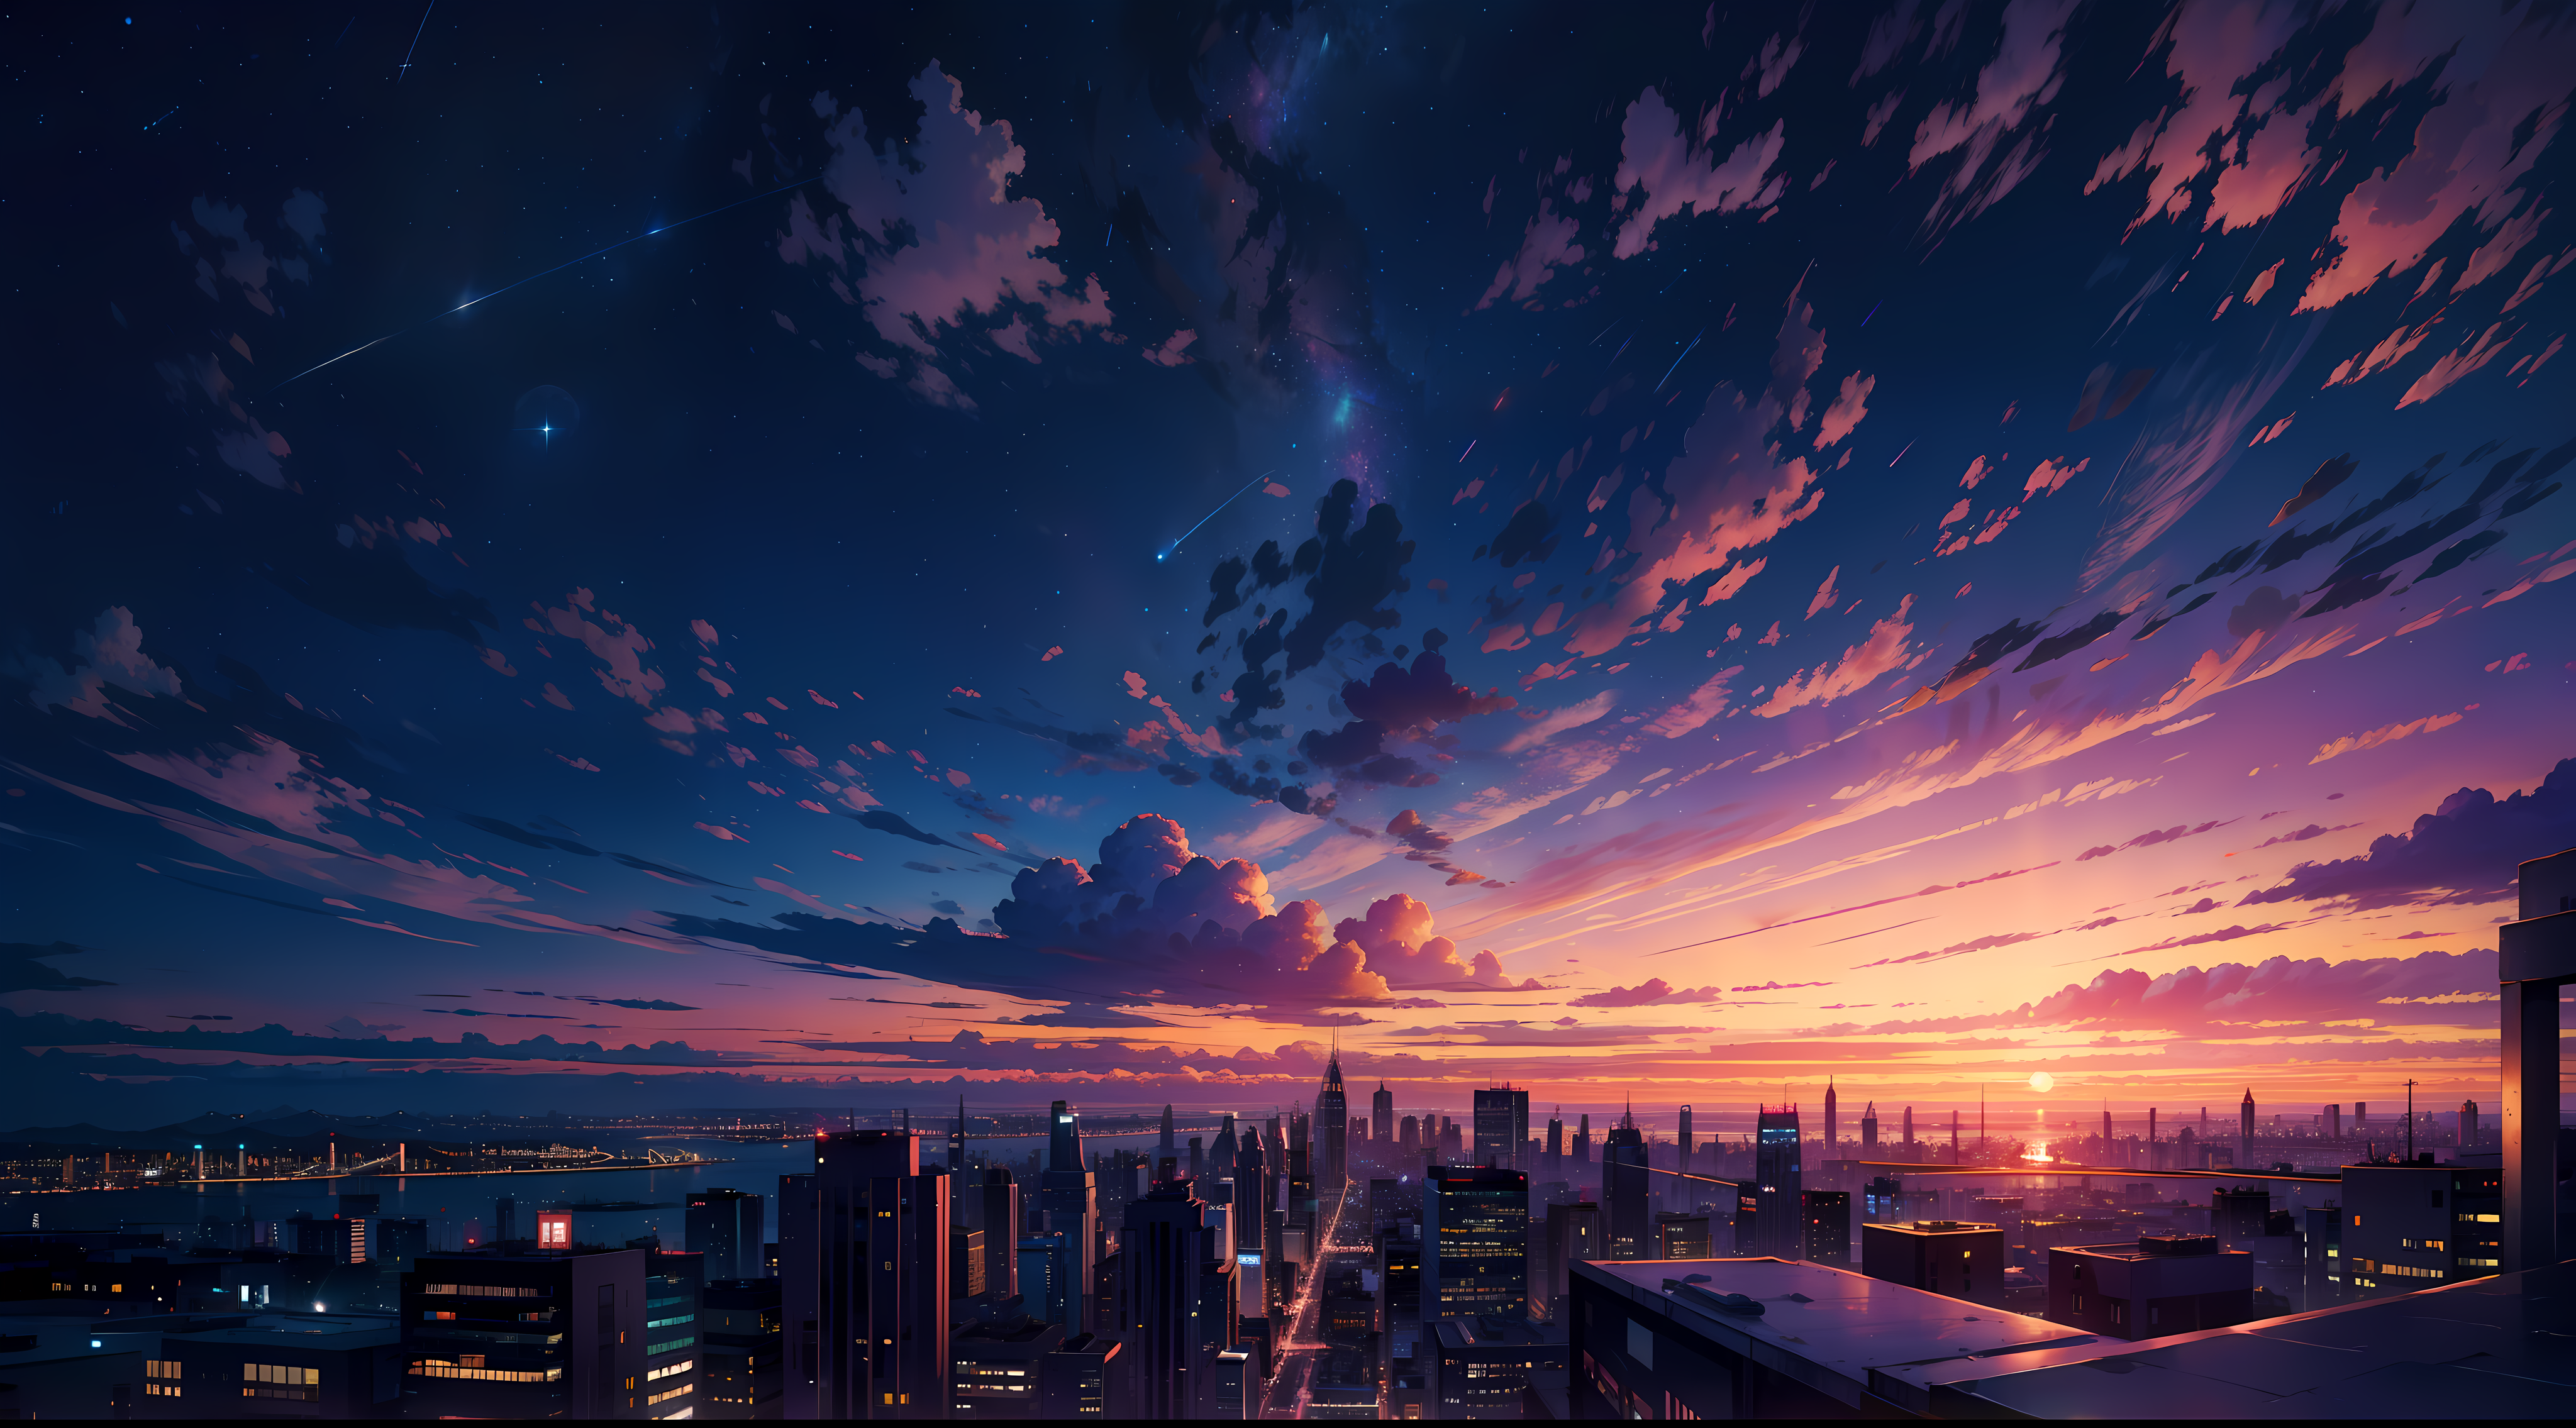 Anime City Lighting By Starry Sky Wallpaper On Desktop 919x Background, 3d  Dark Blue City With Light Reflection Background For Technology Concept 3d  Illustration Rendering, Hd Photography Photo, Render Background Image And